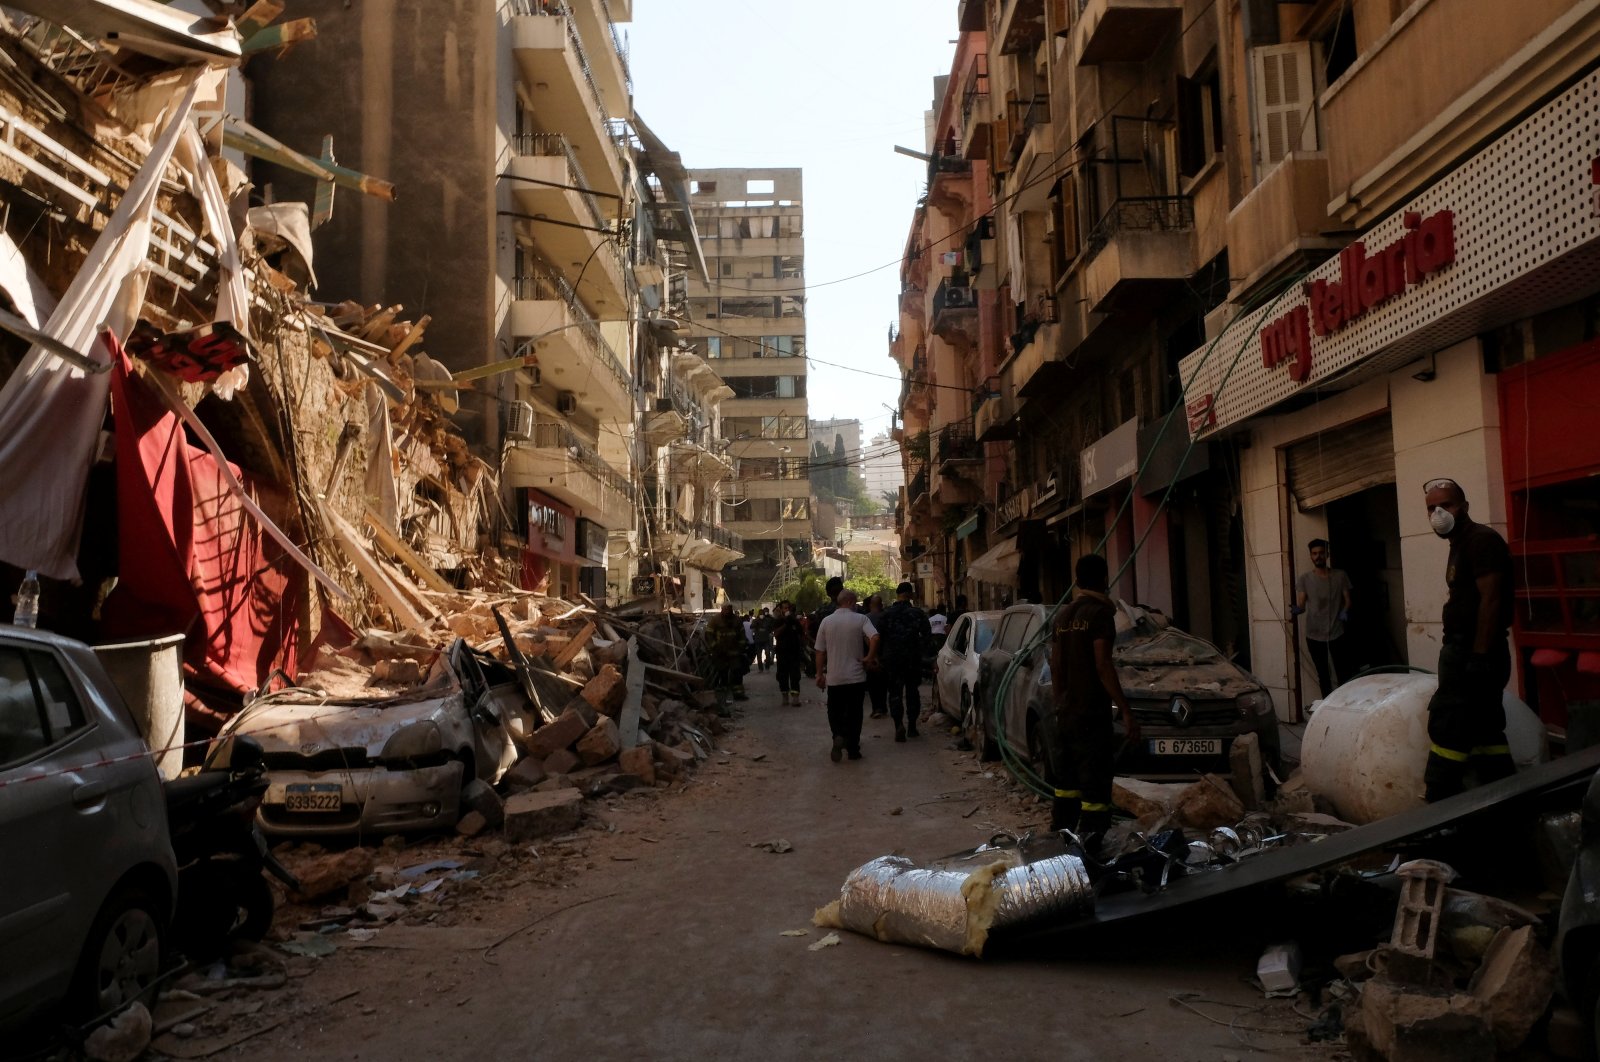 People walk past damaged buildings and vehicles following the blast in Beirut's port area, Aug. 5, 2020. (REUTERS Photo)